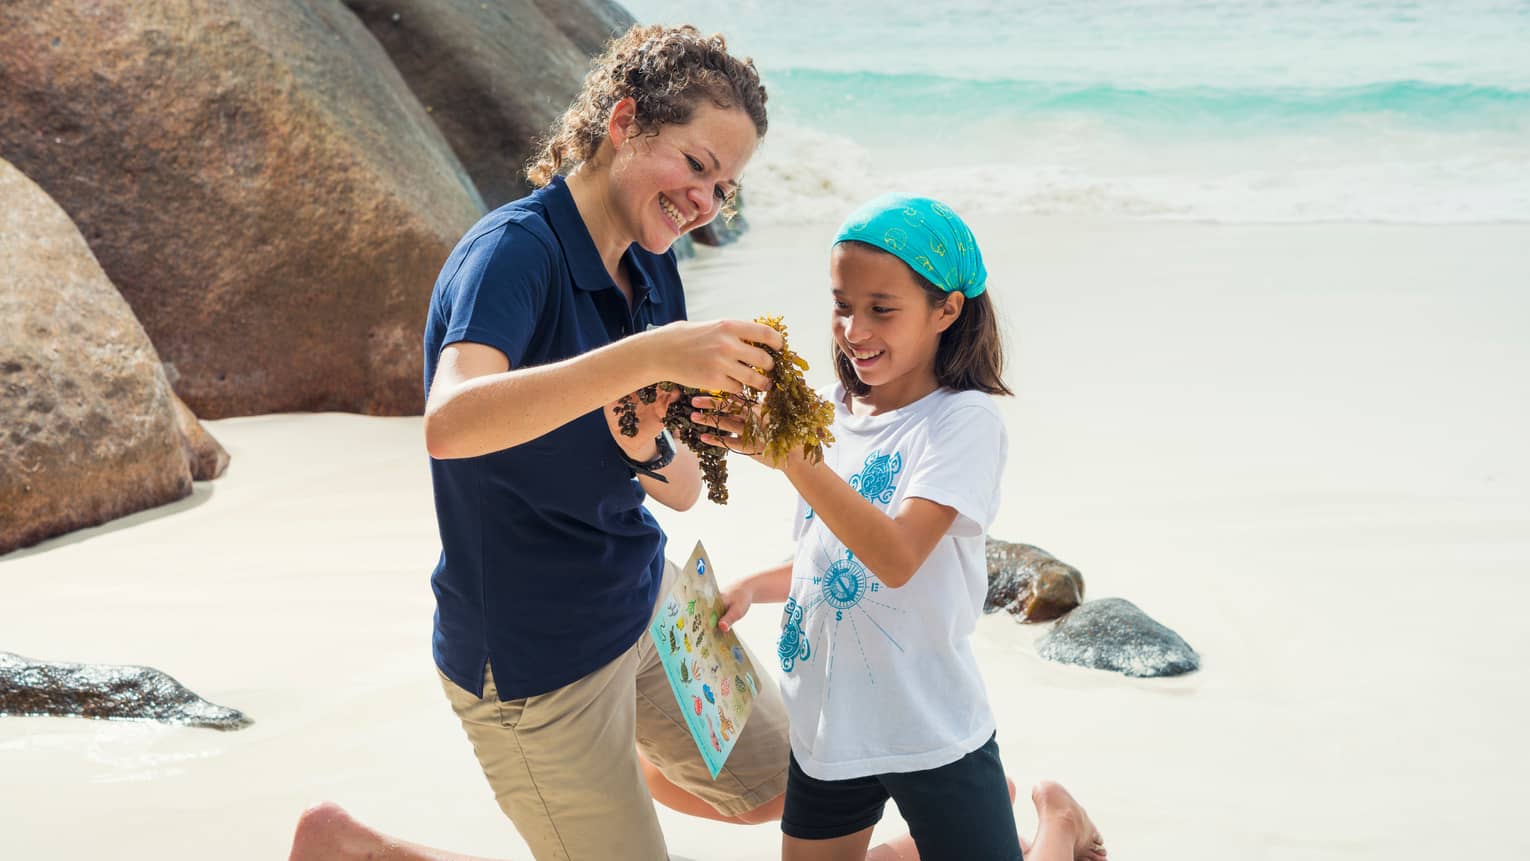 A WiseOceans female employee teaches a young girl about ecology on a beach